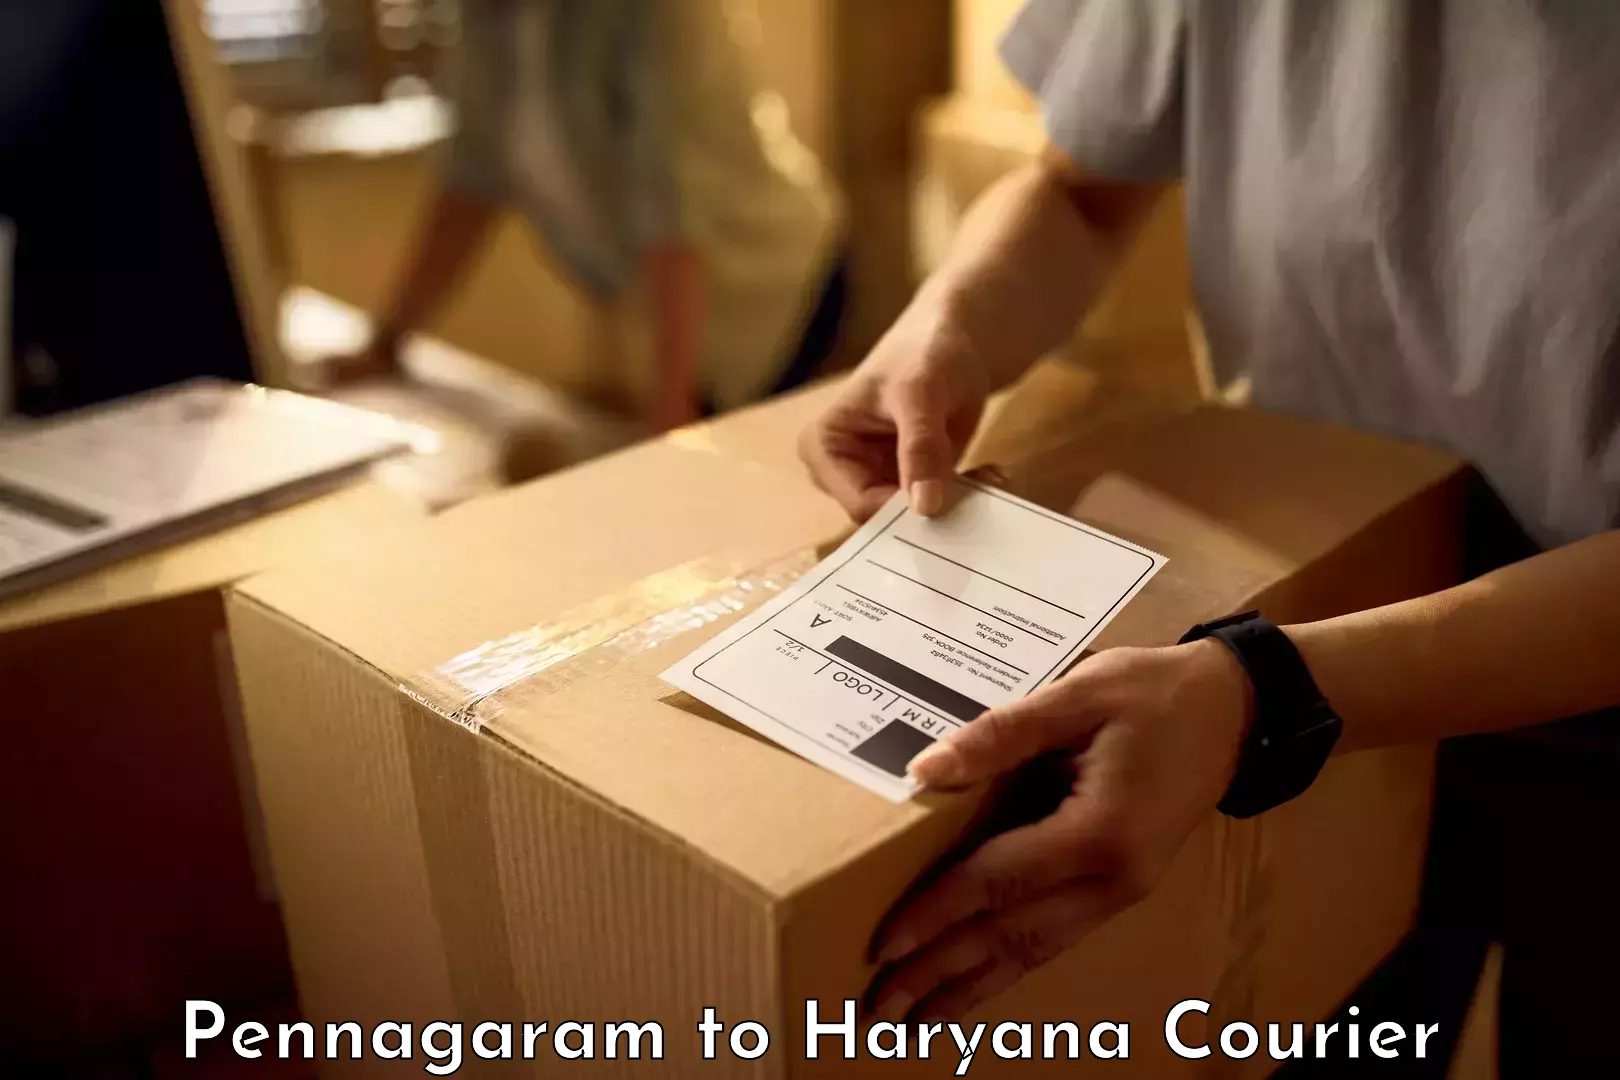 Luggage delivery estimate in Pennagaram to Panchkula